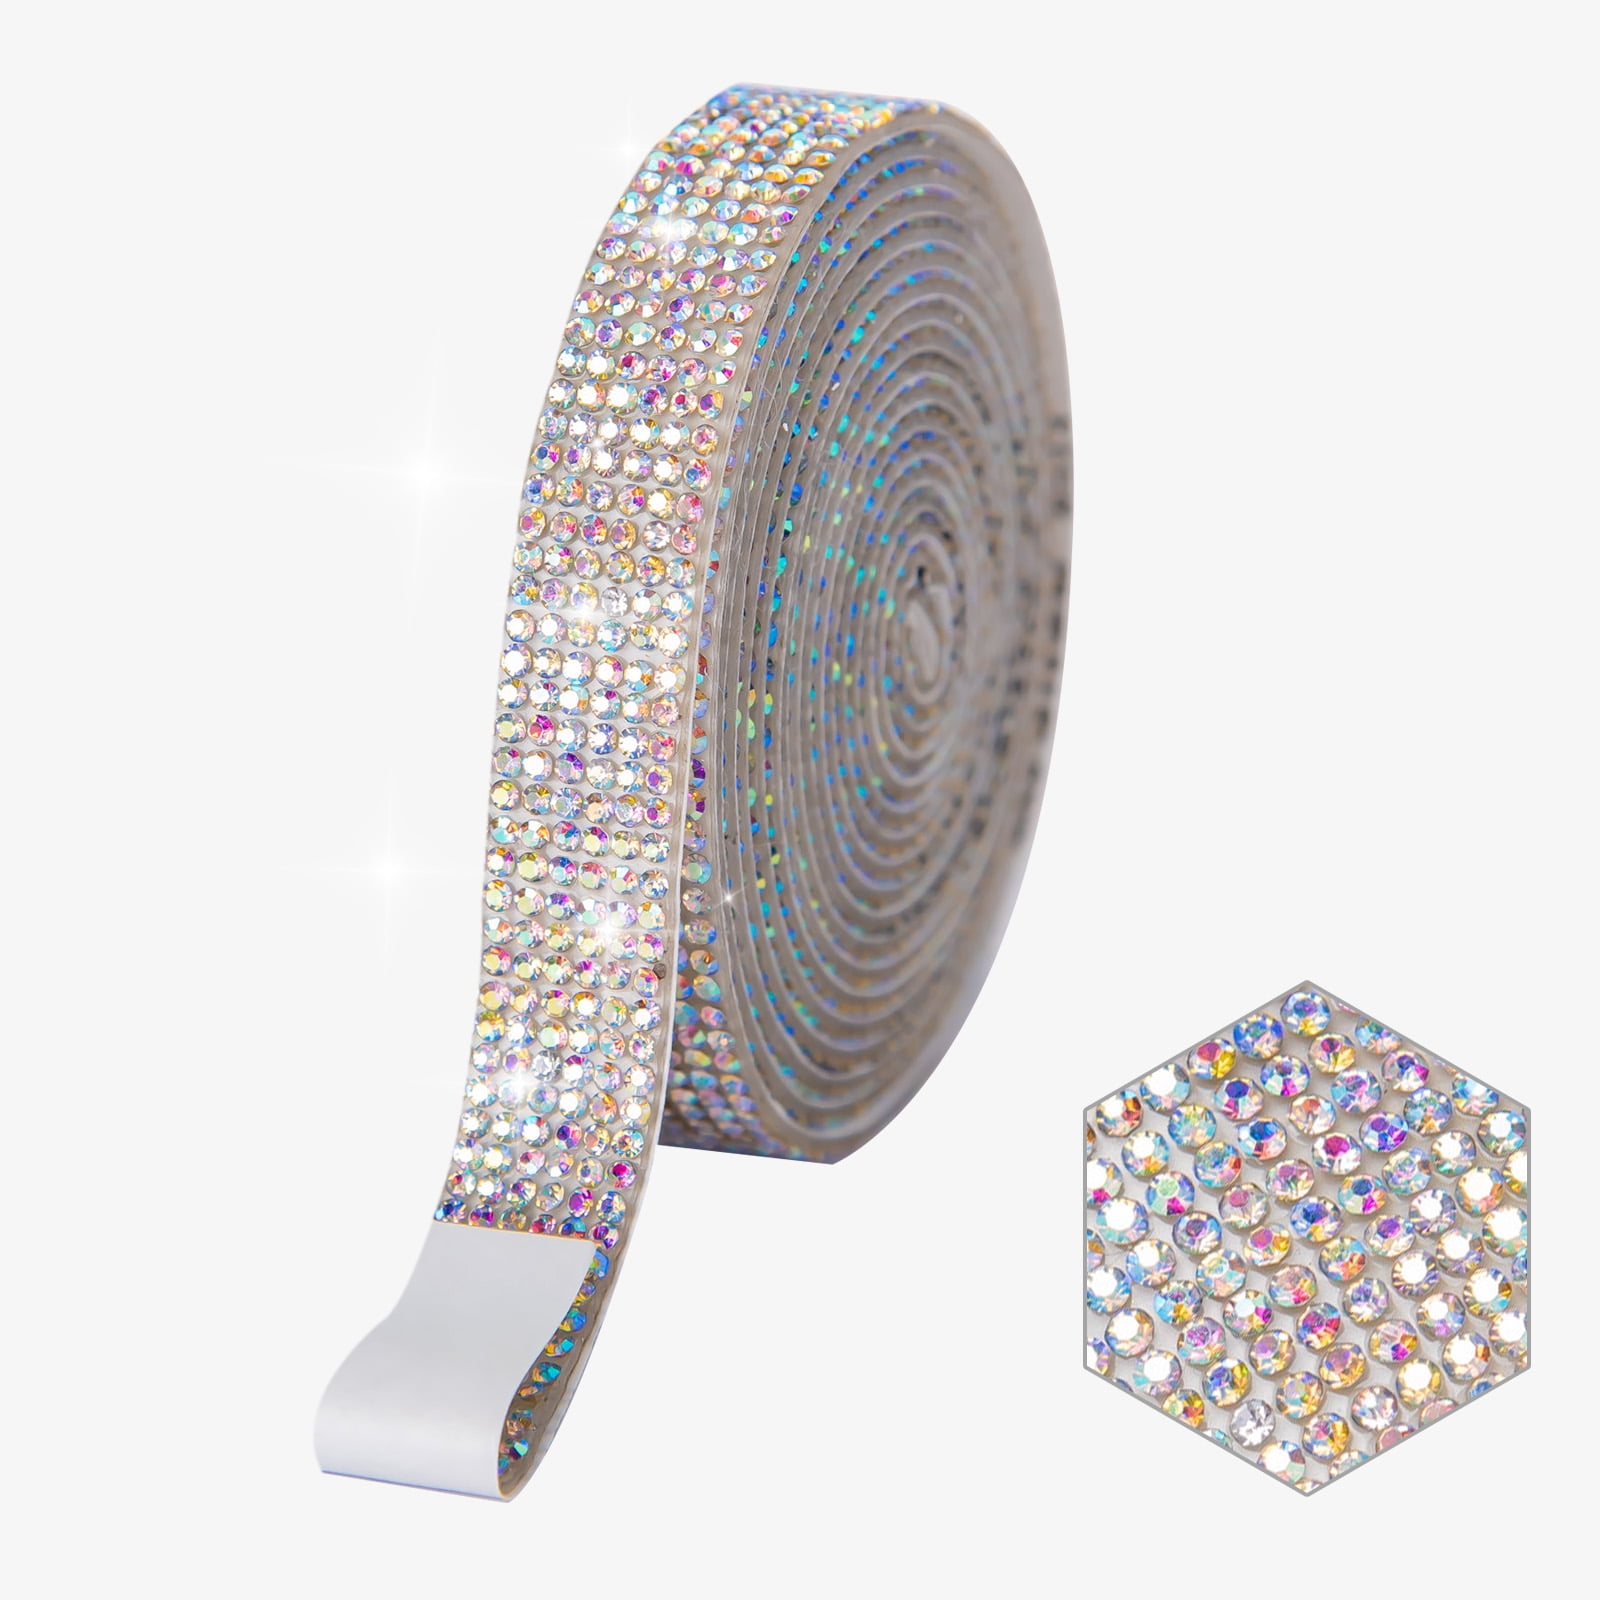 2 Rolls Self Adhesive Rhinestone Ribbon, AB Bling Crystal Craft Silver Small Sparkling St Ribbon Roll F5h6, Size: 1, Other